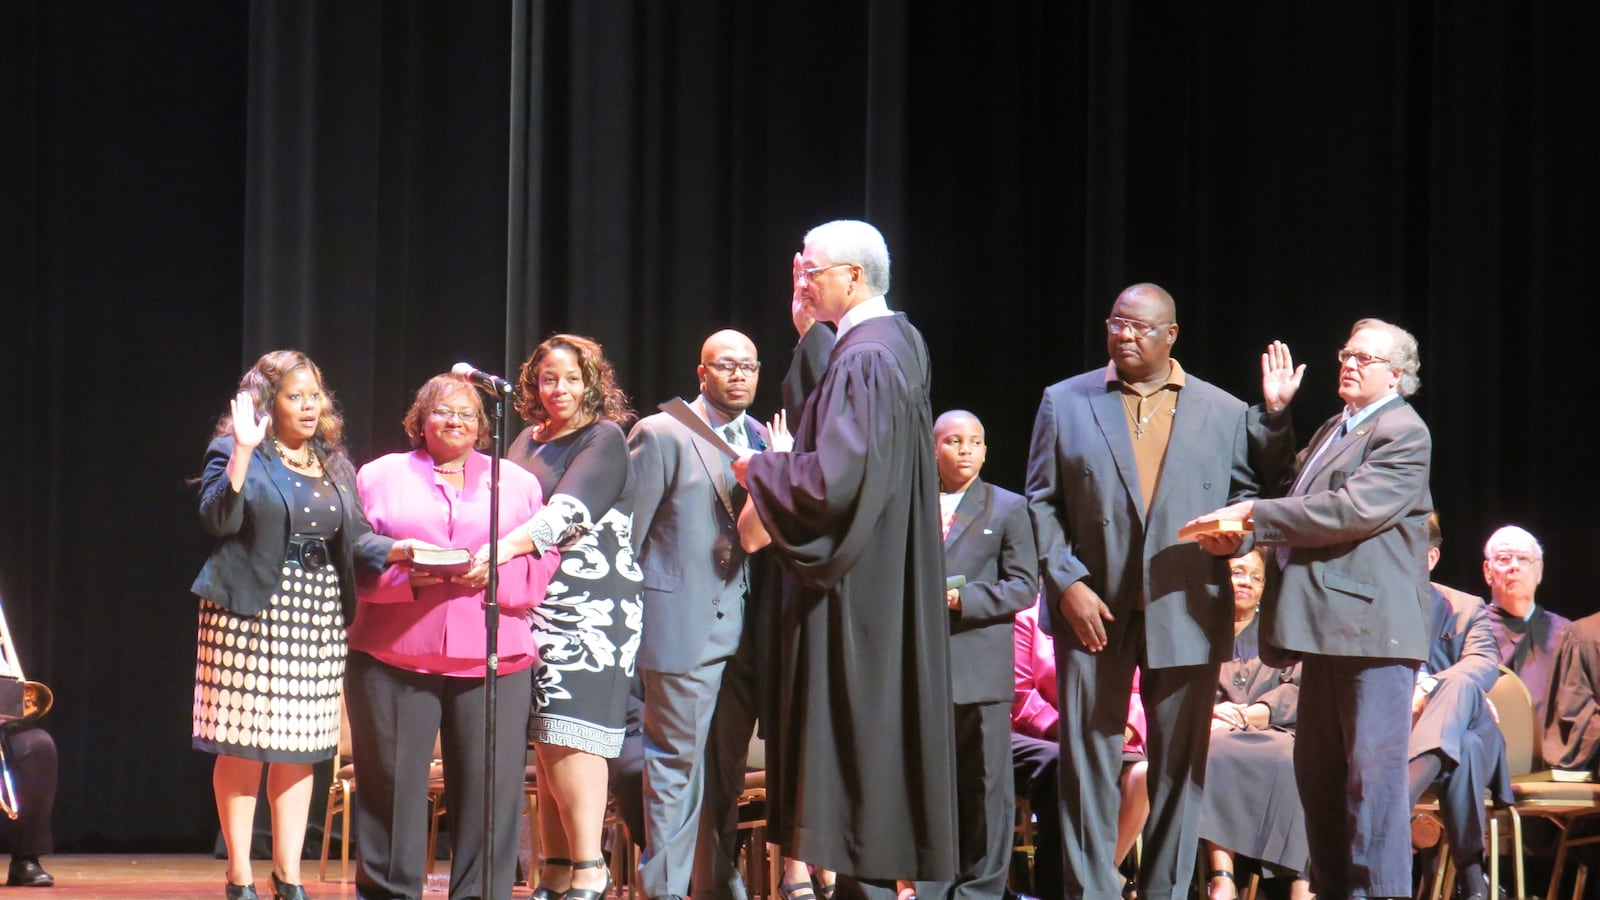 Six new Shelby County board members were sworn in at the Cannon Center.